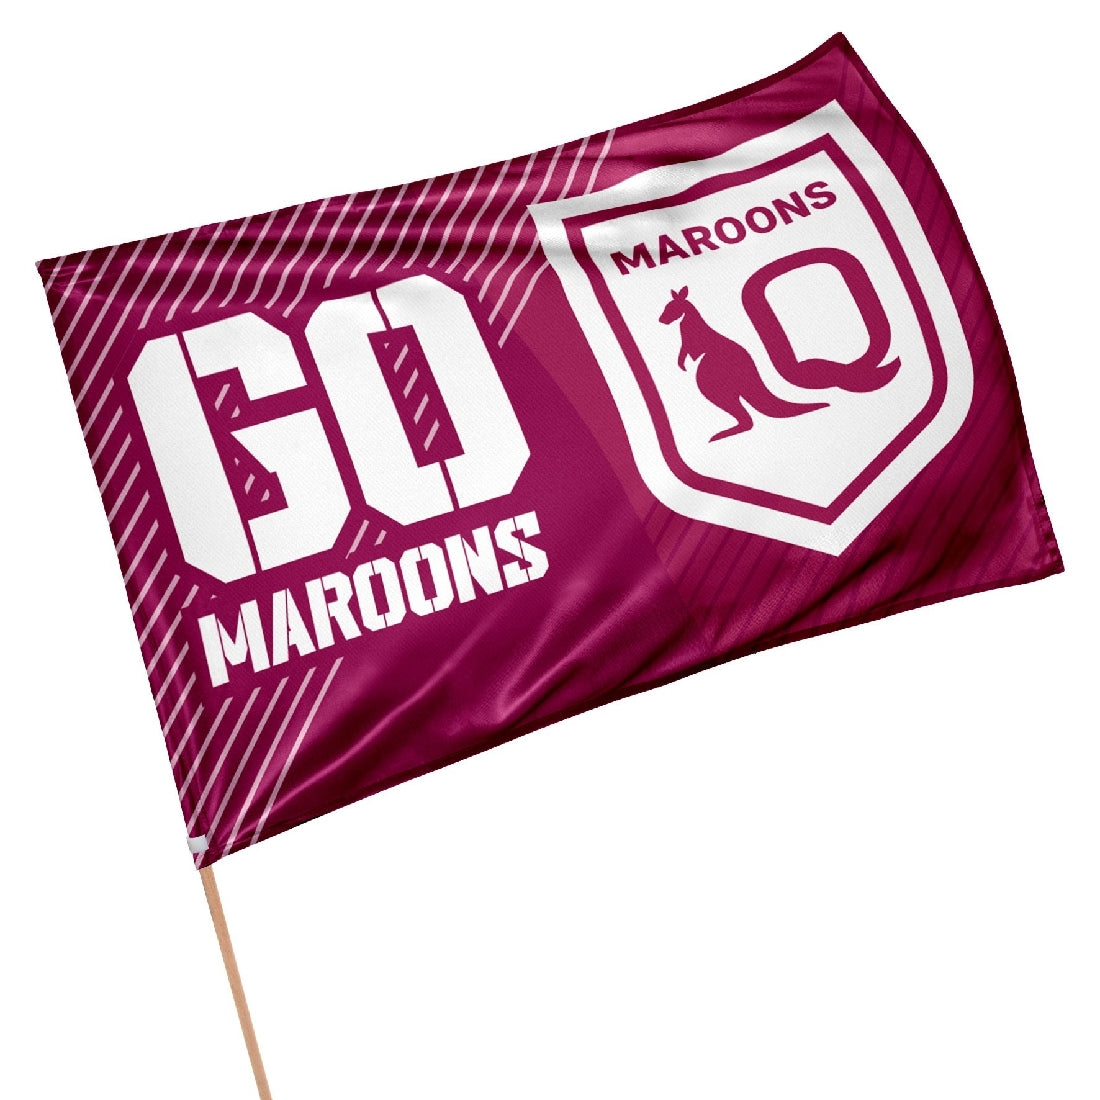 Qld Maroons Game Day Flag